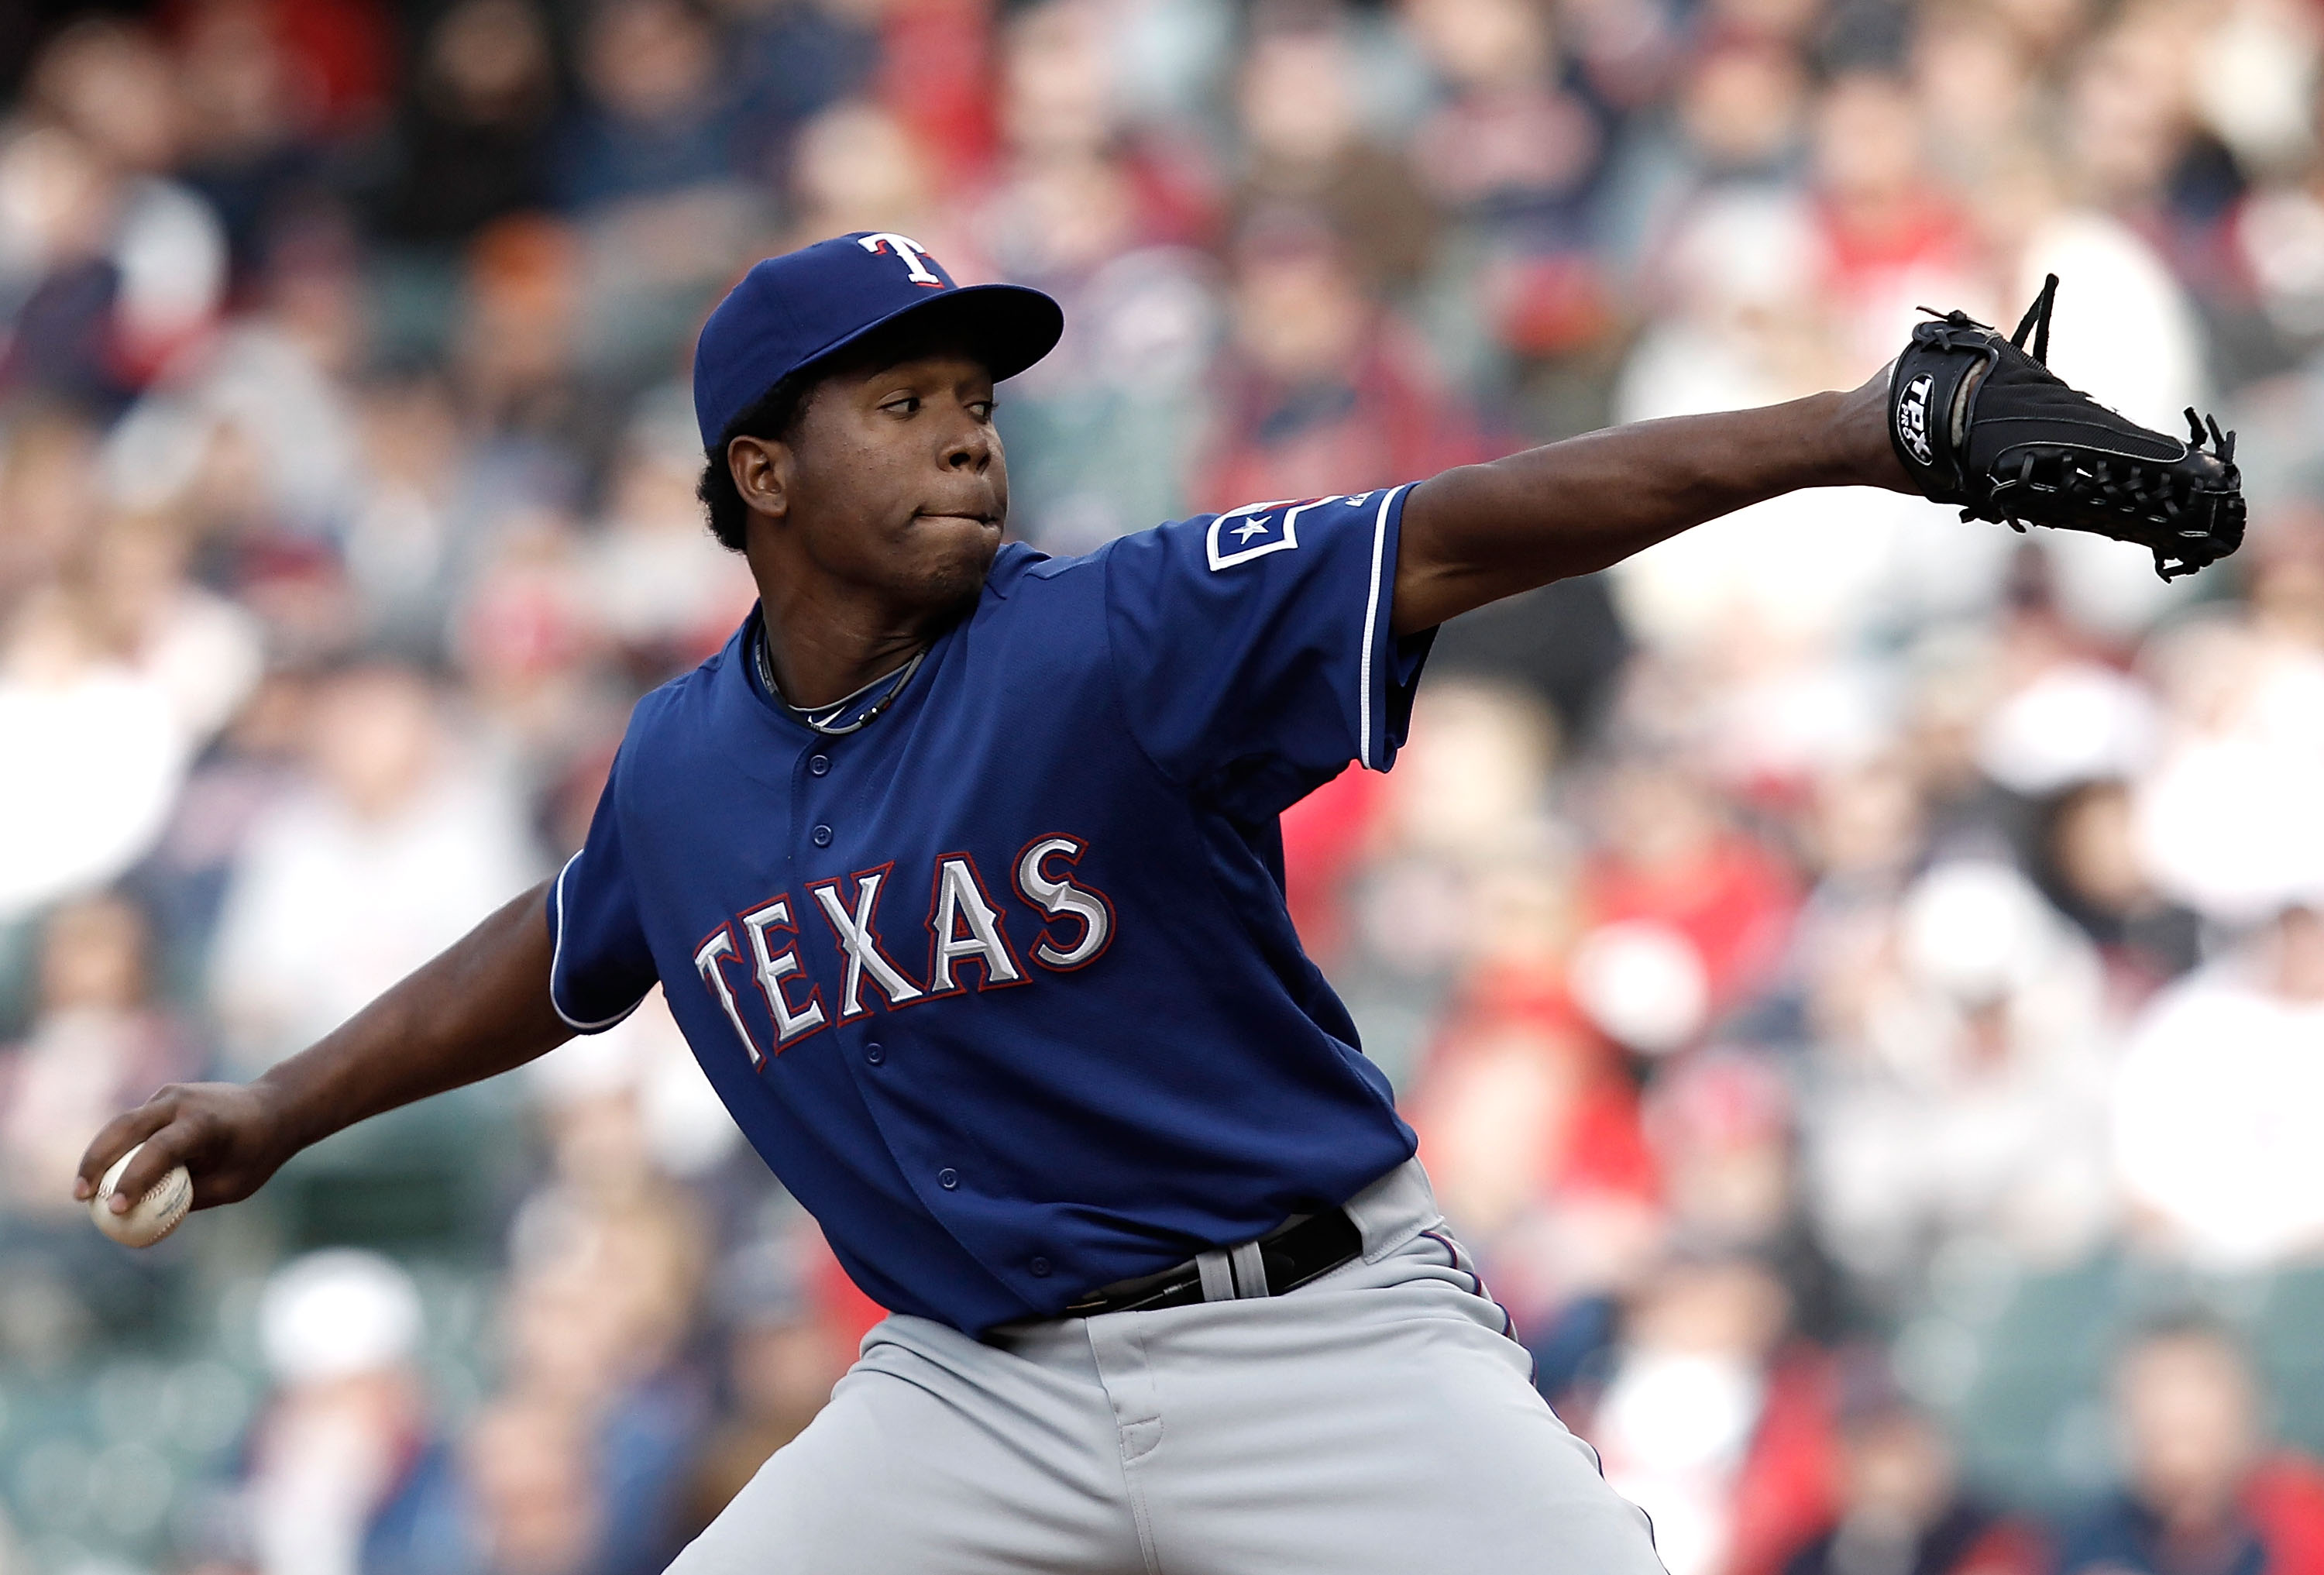 CLEVELAND, OH- APRIL 12: Neftali Feliz #30 of the Texas Rangers pitches against the Cleveland Indians during the Opening Day game on April 12, 2010 at Progressive Field in Cleveland, Ohio.  (Photo by Jared Wickerham/Getty Images)